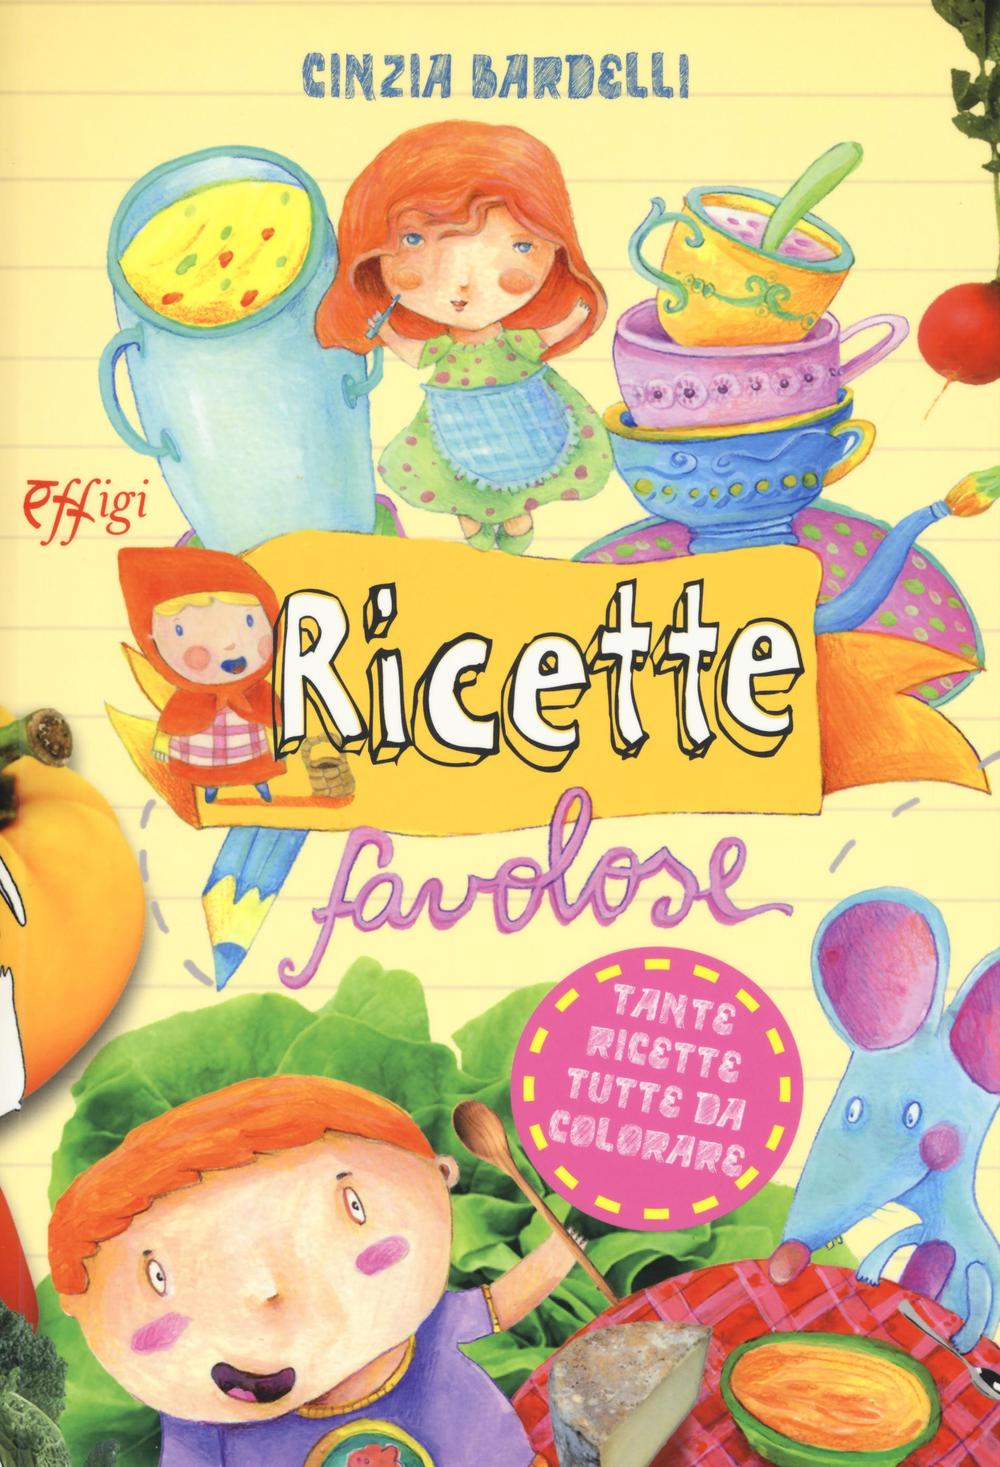 Image of Ricette favolose